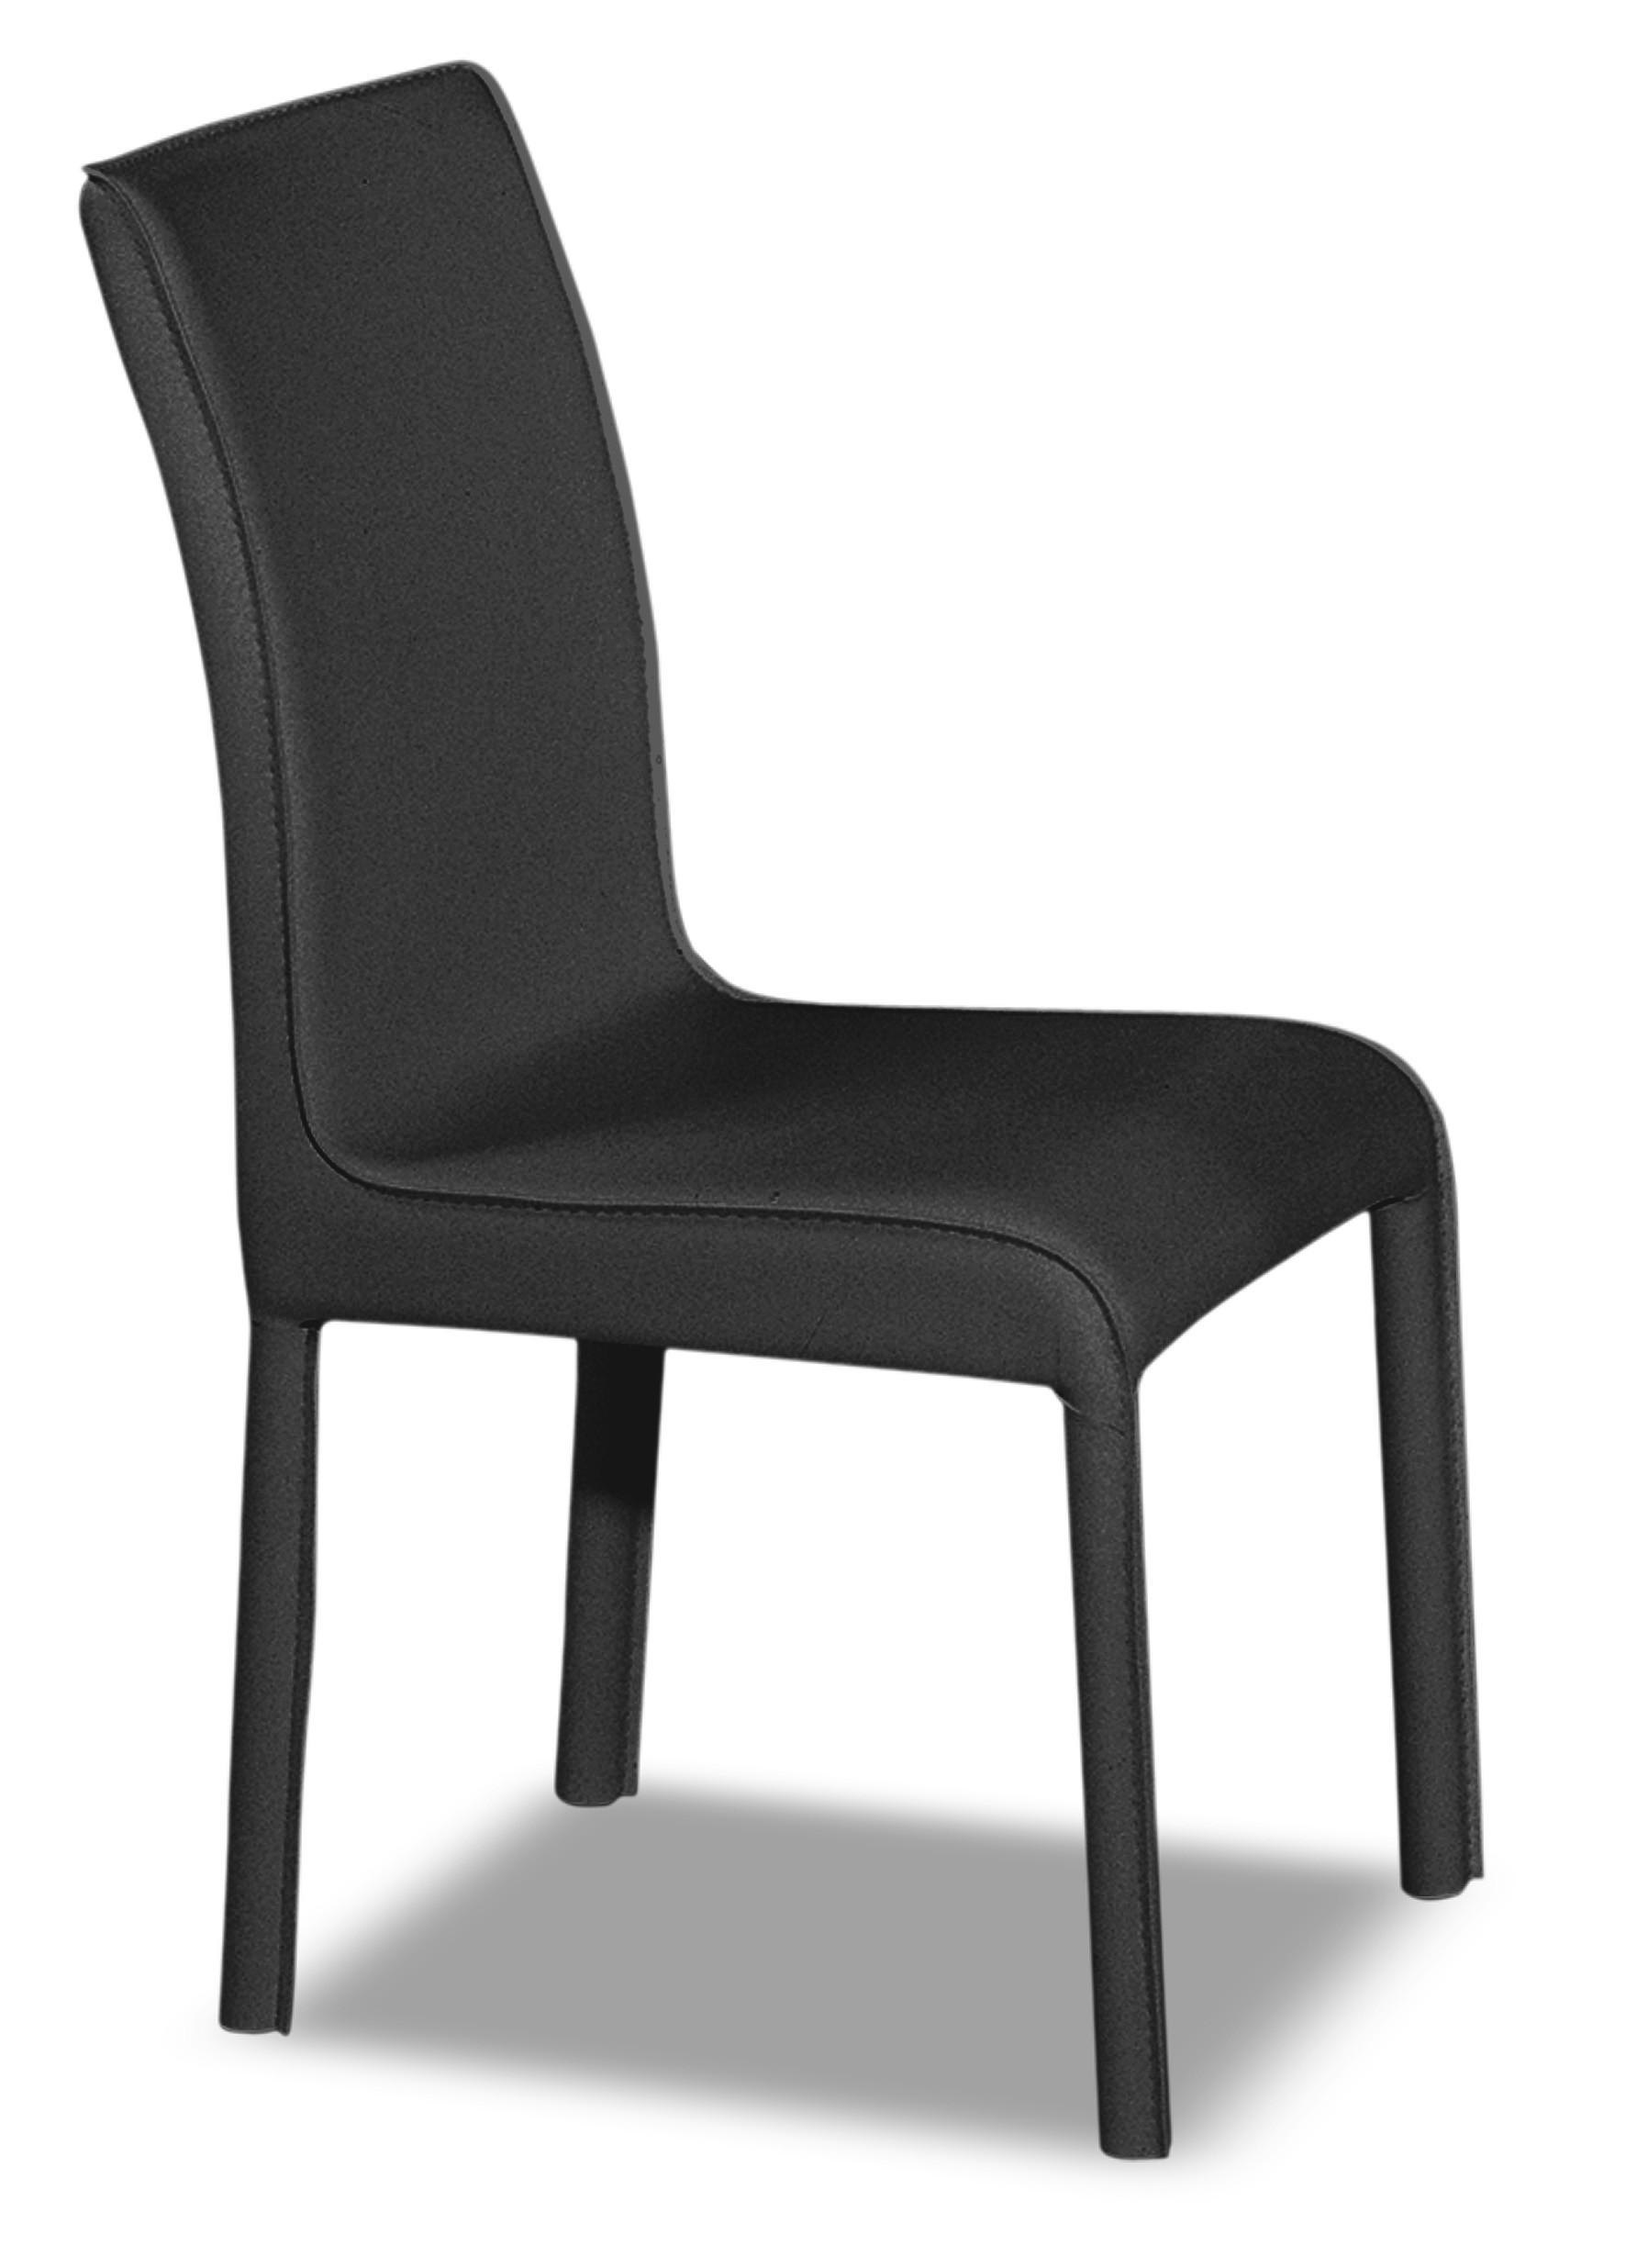 

    
At Home USA Swansea Dining Side Chair Brown SKUDC201029-DC8088-BROWN-Set-6
